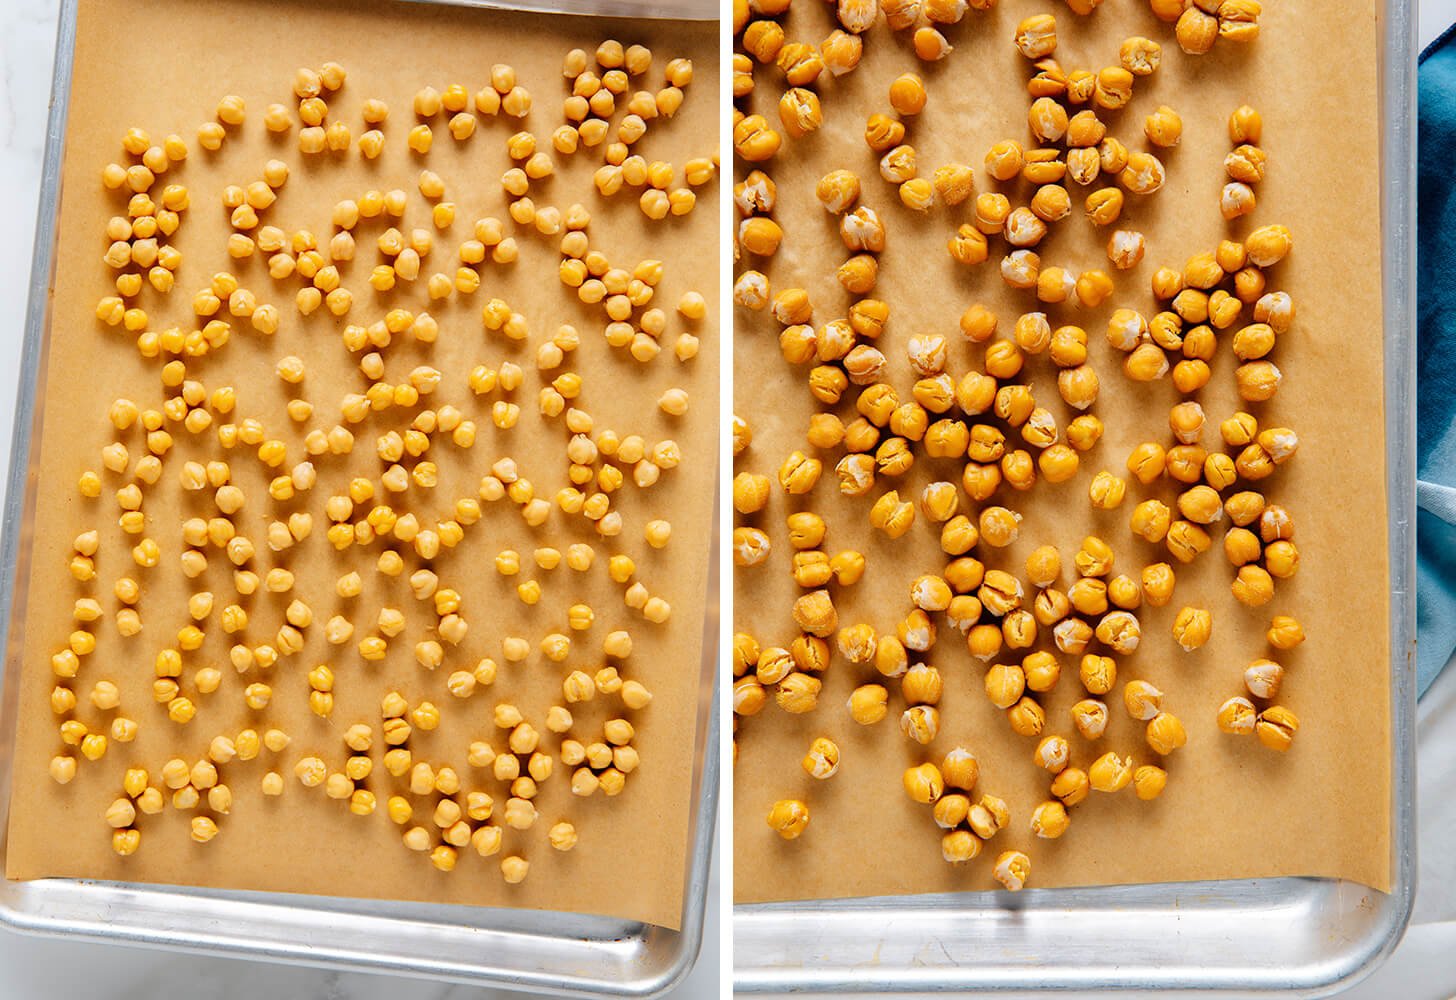 chickpeas before and after baking